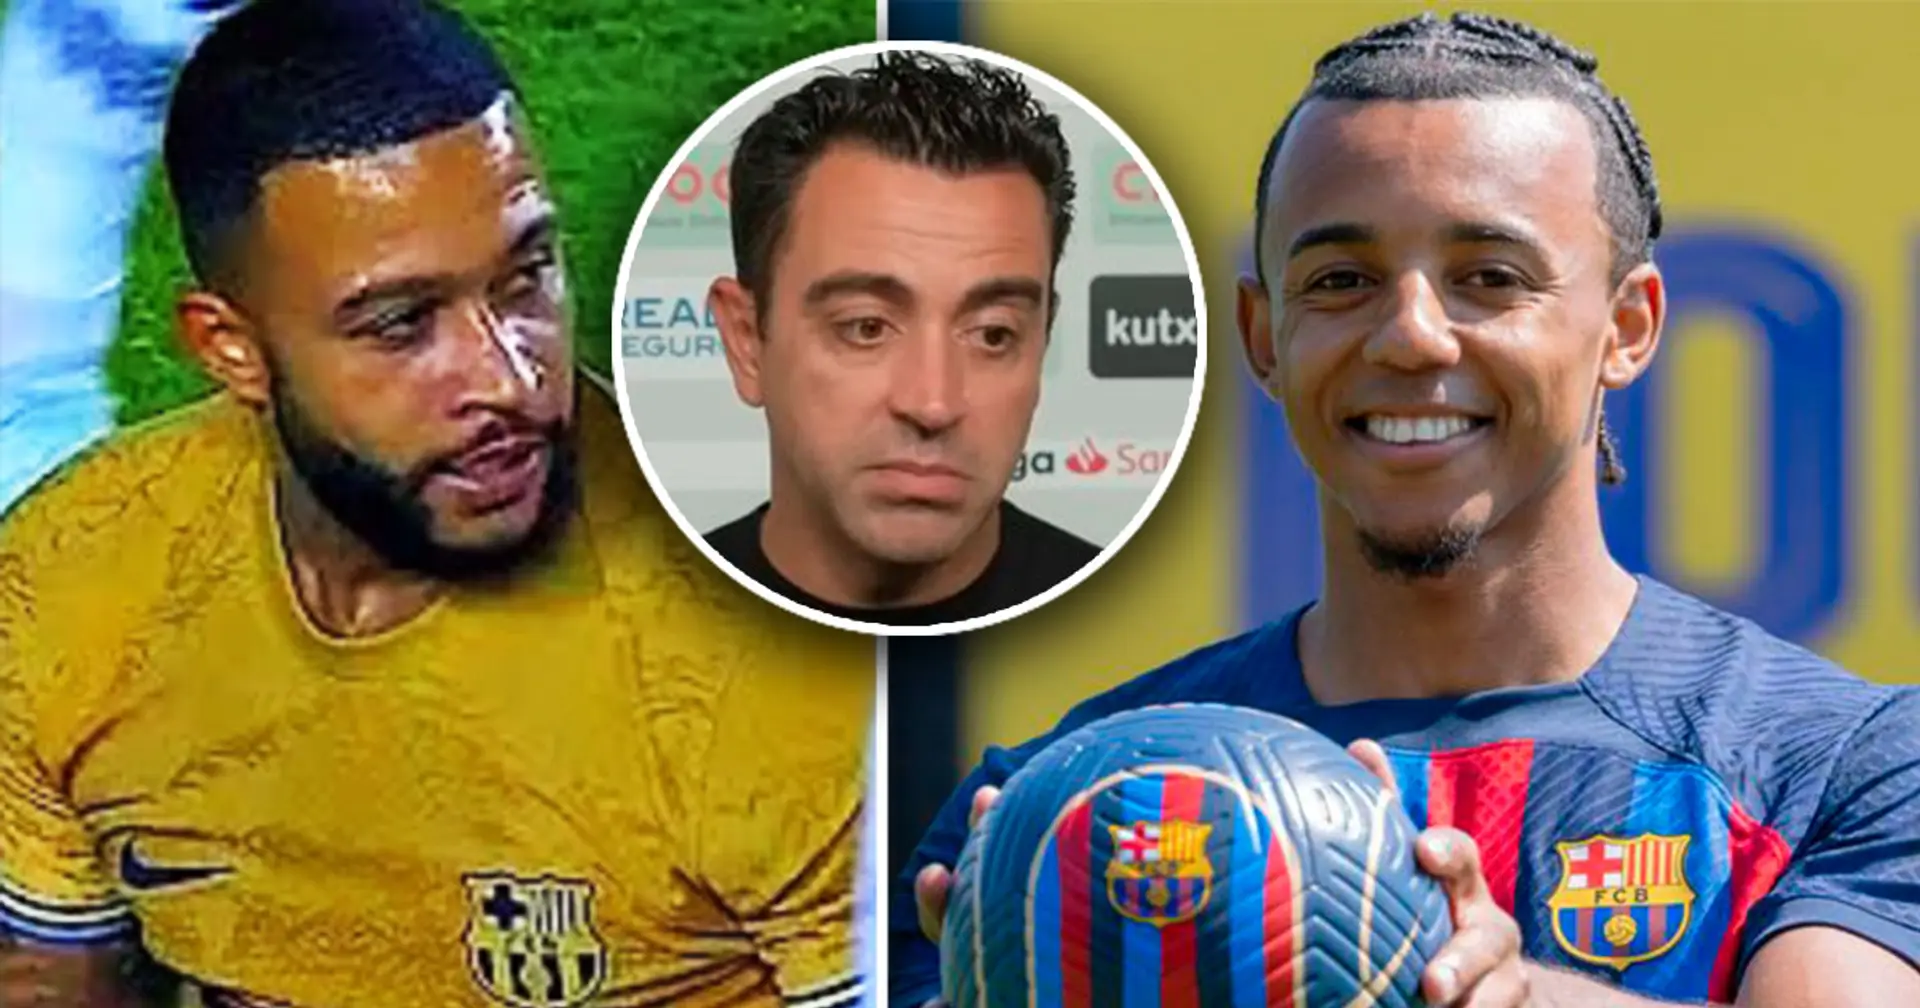 Memphis' exit 'complicated' – what do Barca need to register Kounde? Answered